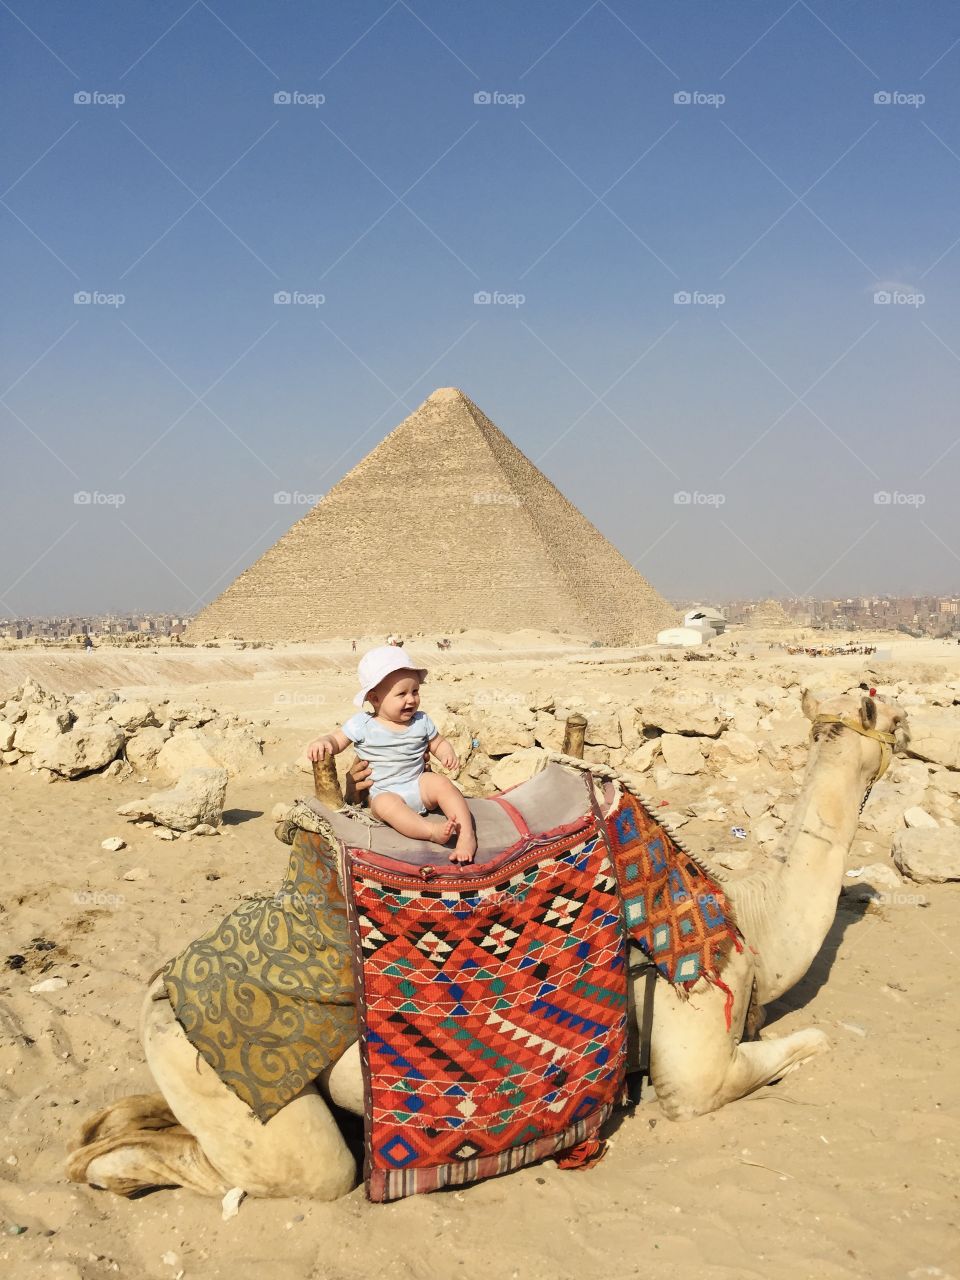 Baby sit on camel 